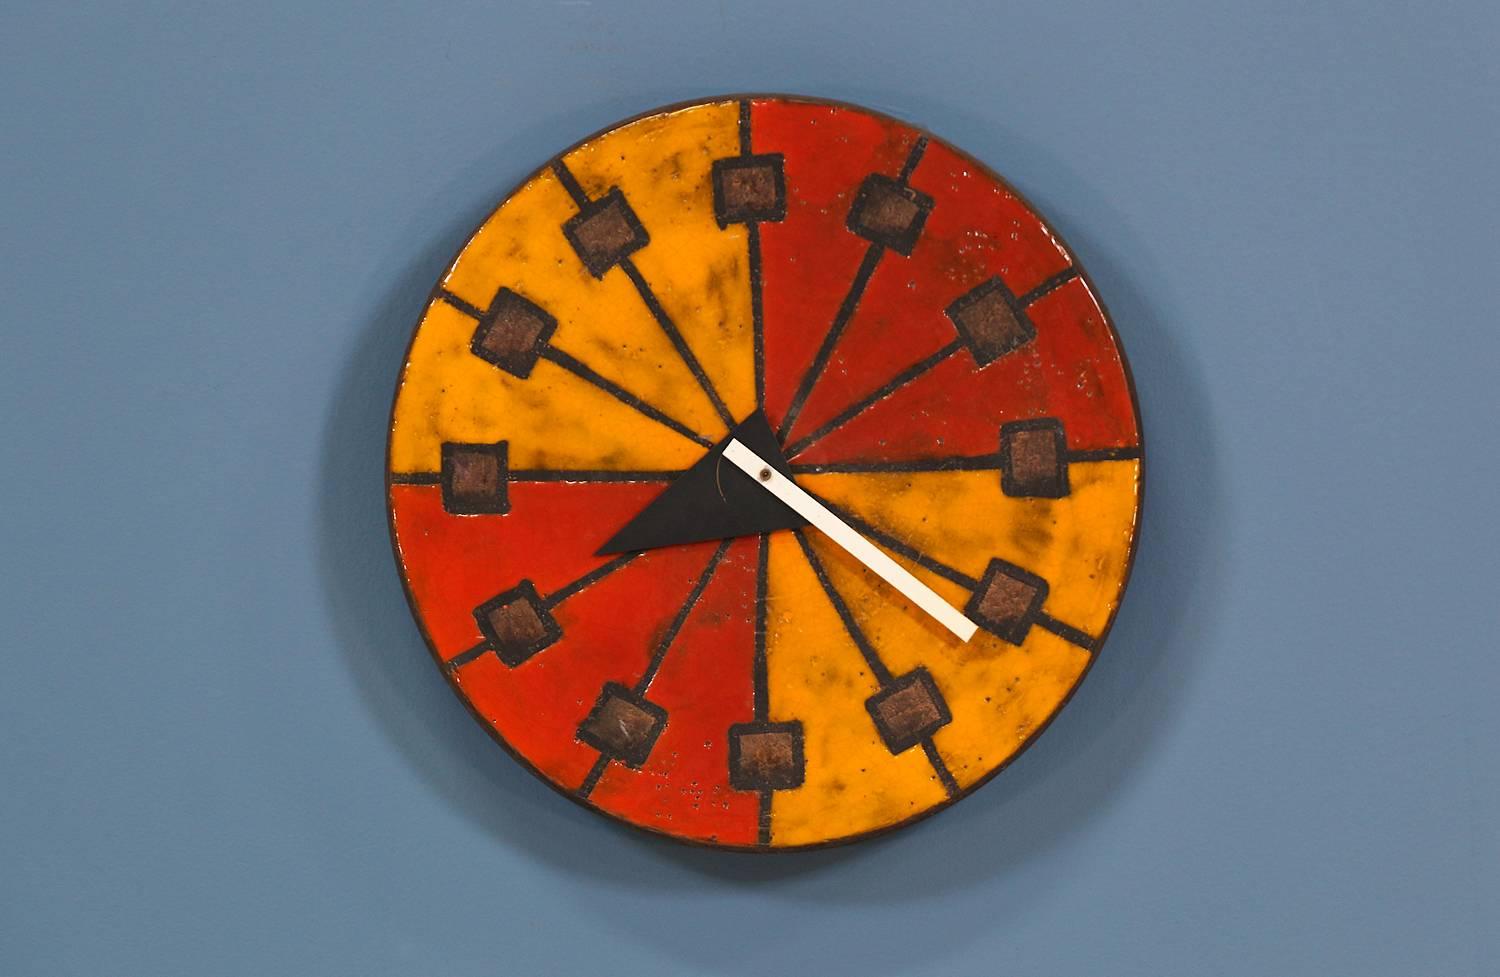 Mid Century modern ceramic clock designed by Bitossi & George Nelson for Howard Miller & Raymor circa 1950’s. This iconic collaboration is part of the “Meridian” collection and features a ceramic glazed stoneware face with earthy colors designed by